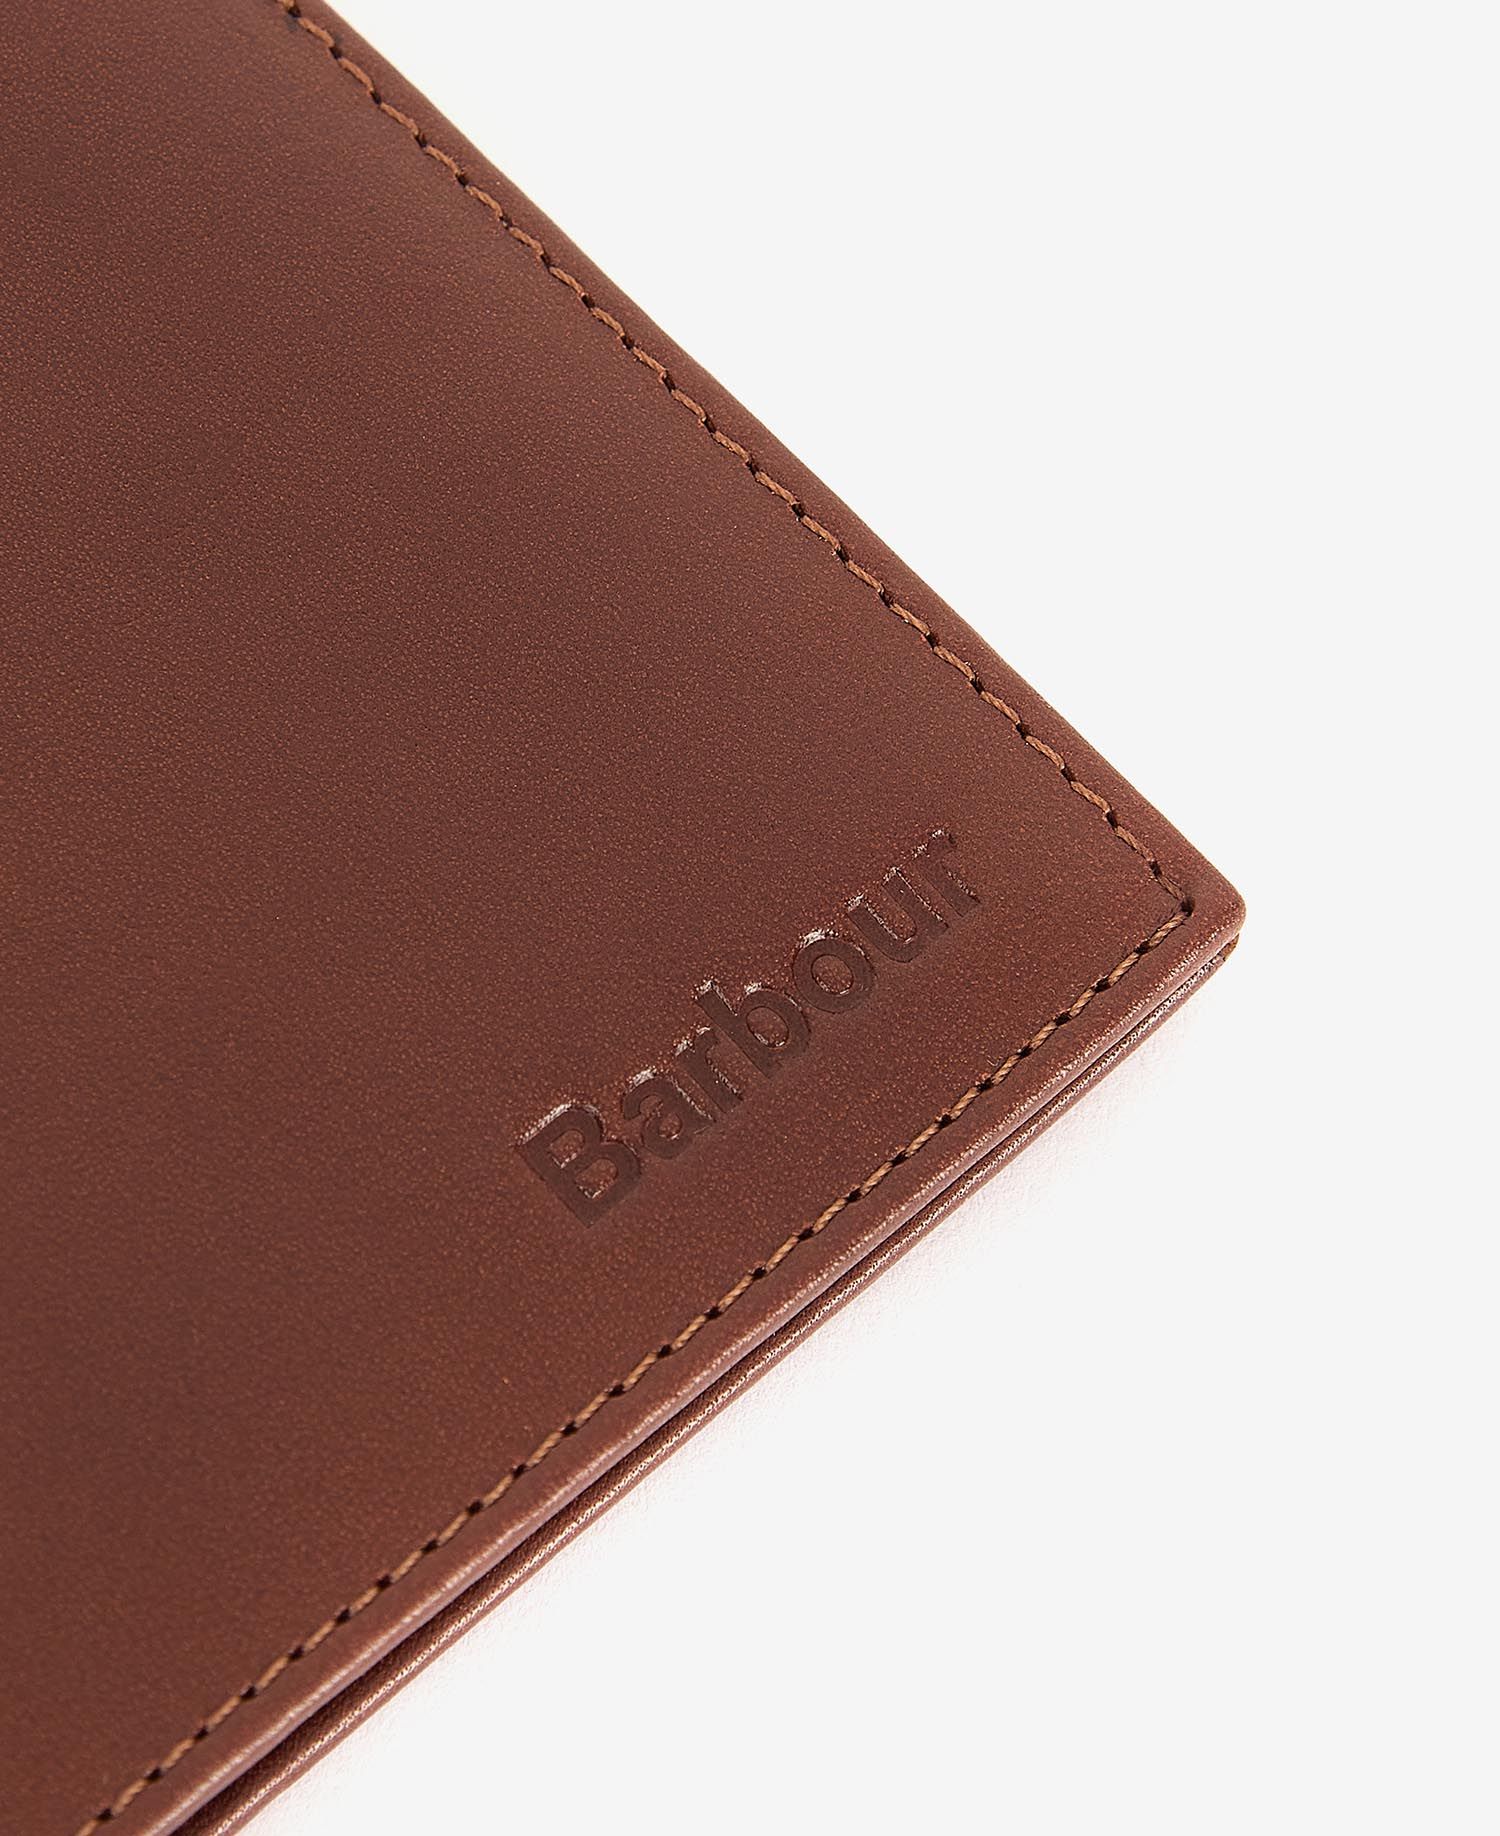 Barbour Mens Colwell Small Billfold Wallet